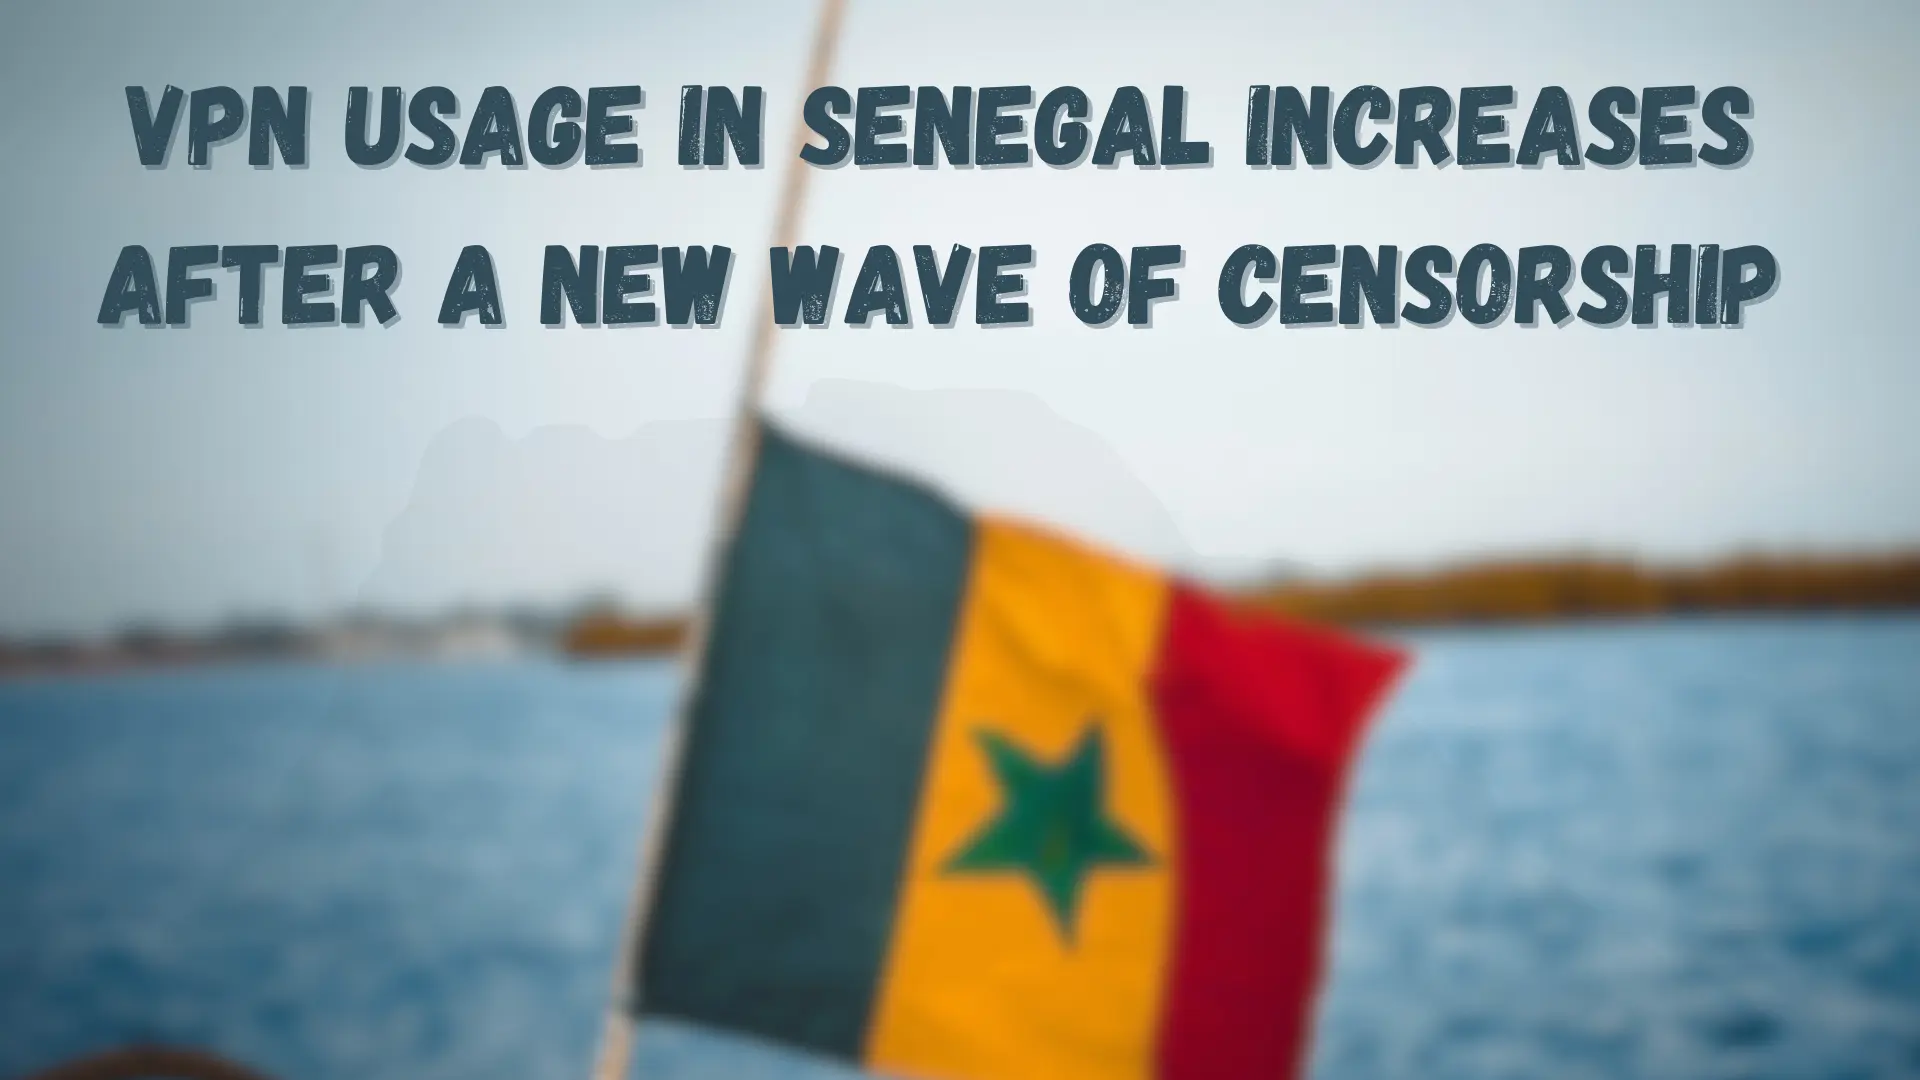 VPN Usage in Senegal Increases After a New Wave of Censorship